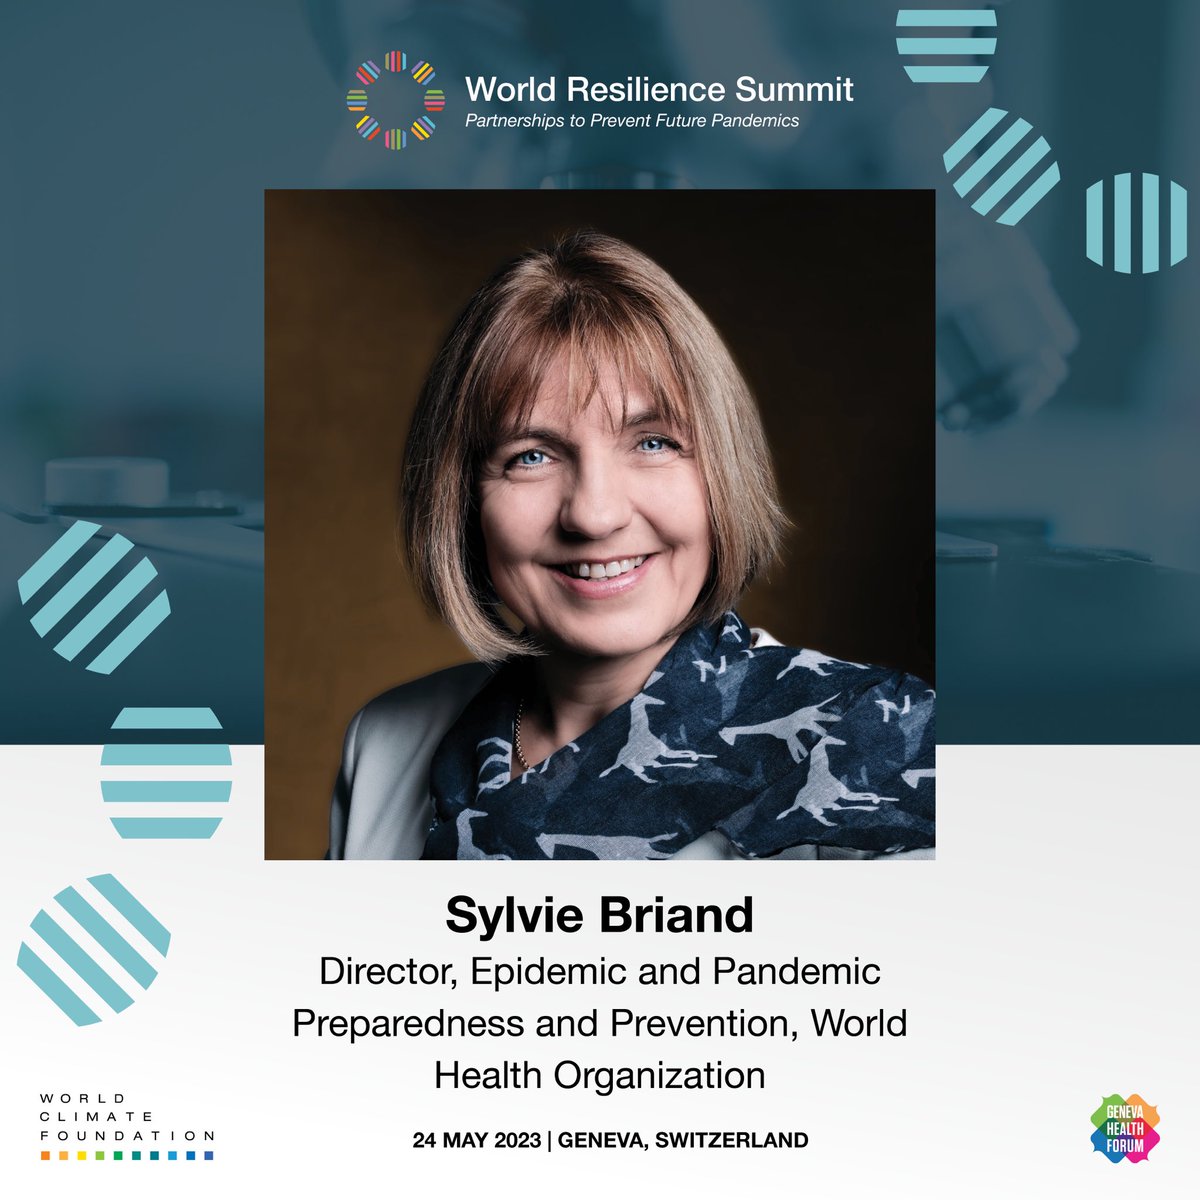 Join @SCBriand for the evening reception tomorrow at #WRSummit2023 hosted by @wclimate and @Genevaforum, and gathering public and private leaders to accelerate solutions for #pandemicprevention and #preparedness🧬

➡ bit.ly/WRSReception
#WHA76

@FLAHAULT @JensNielsen26